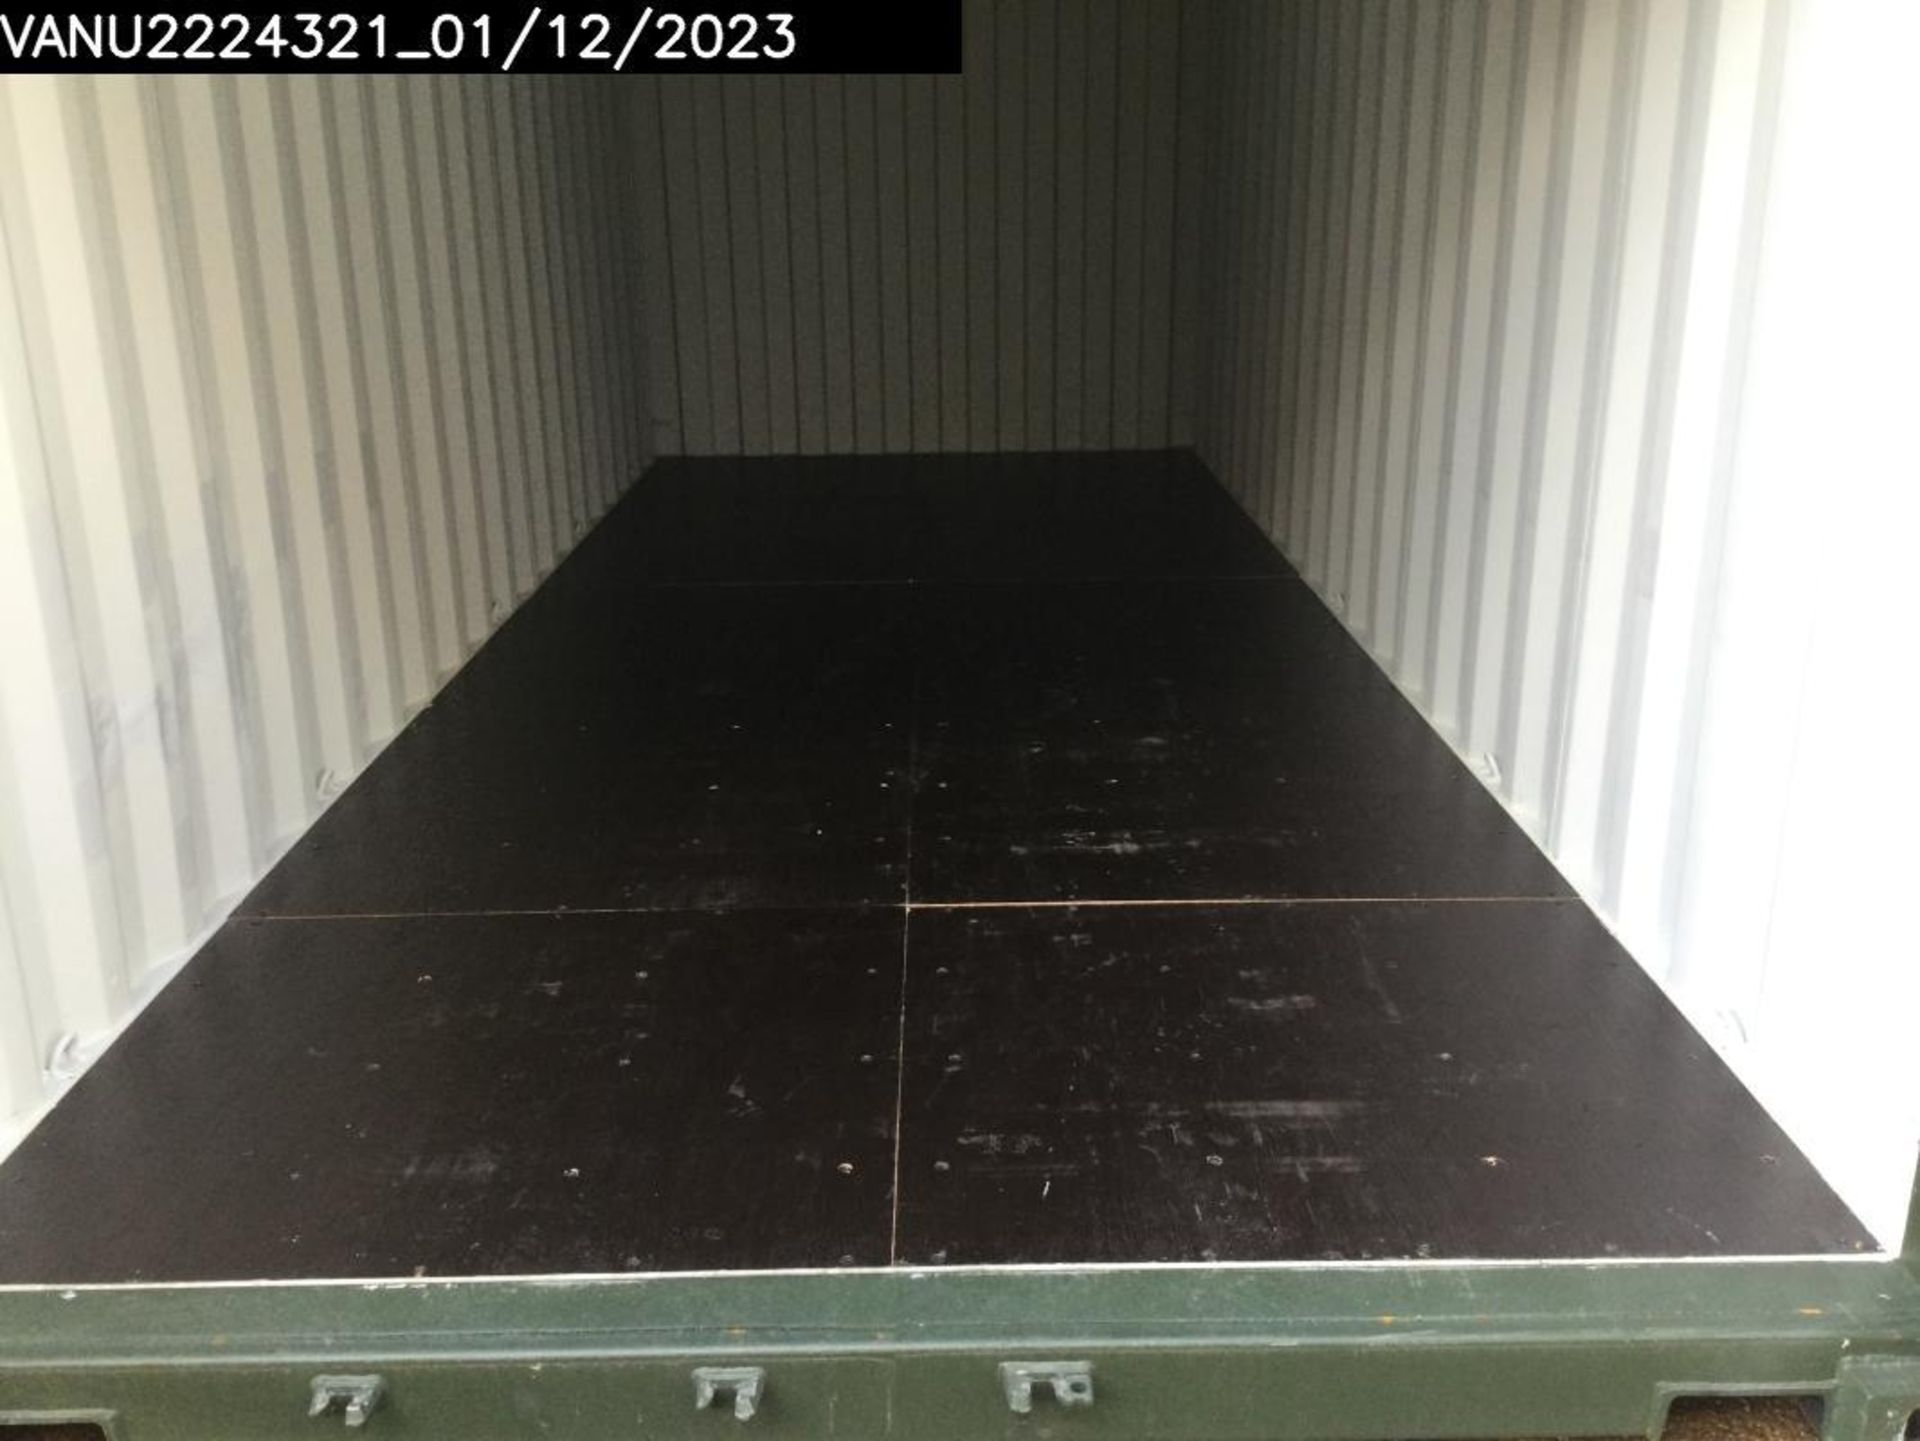 One Trip 20ft Shipping Container - Unit Number – VANU2224321 - Image 7 of 7